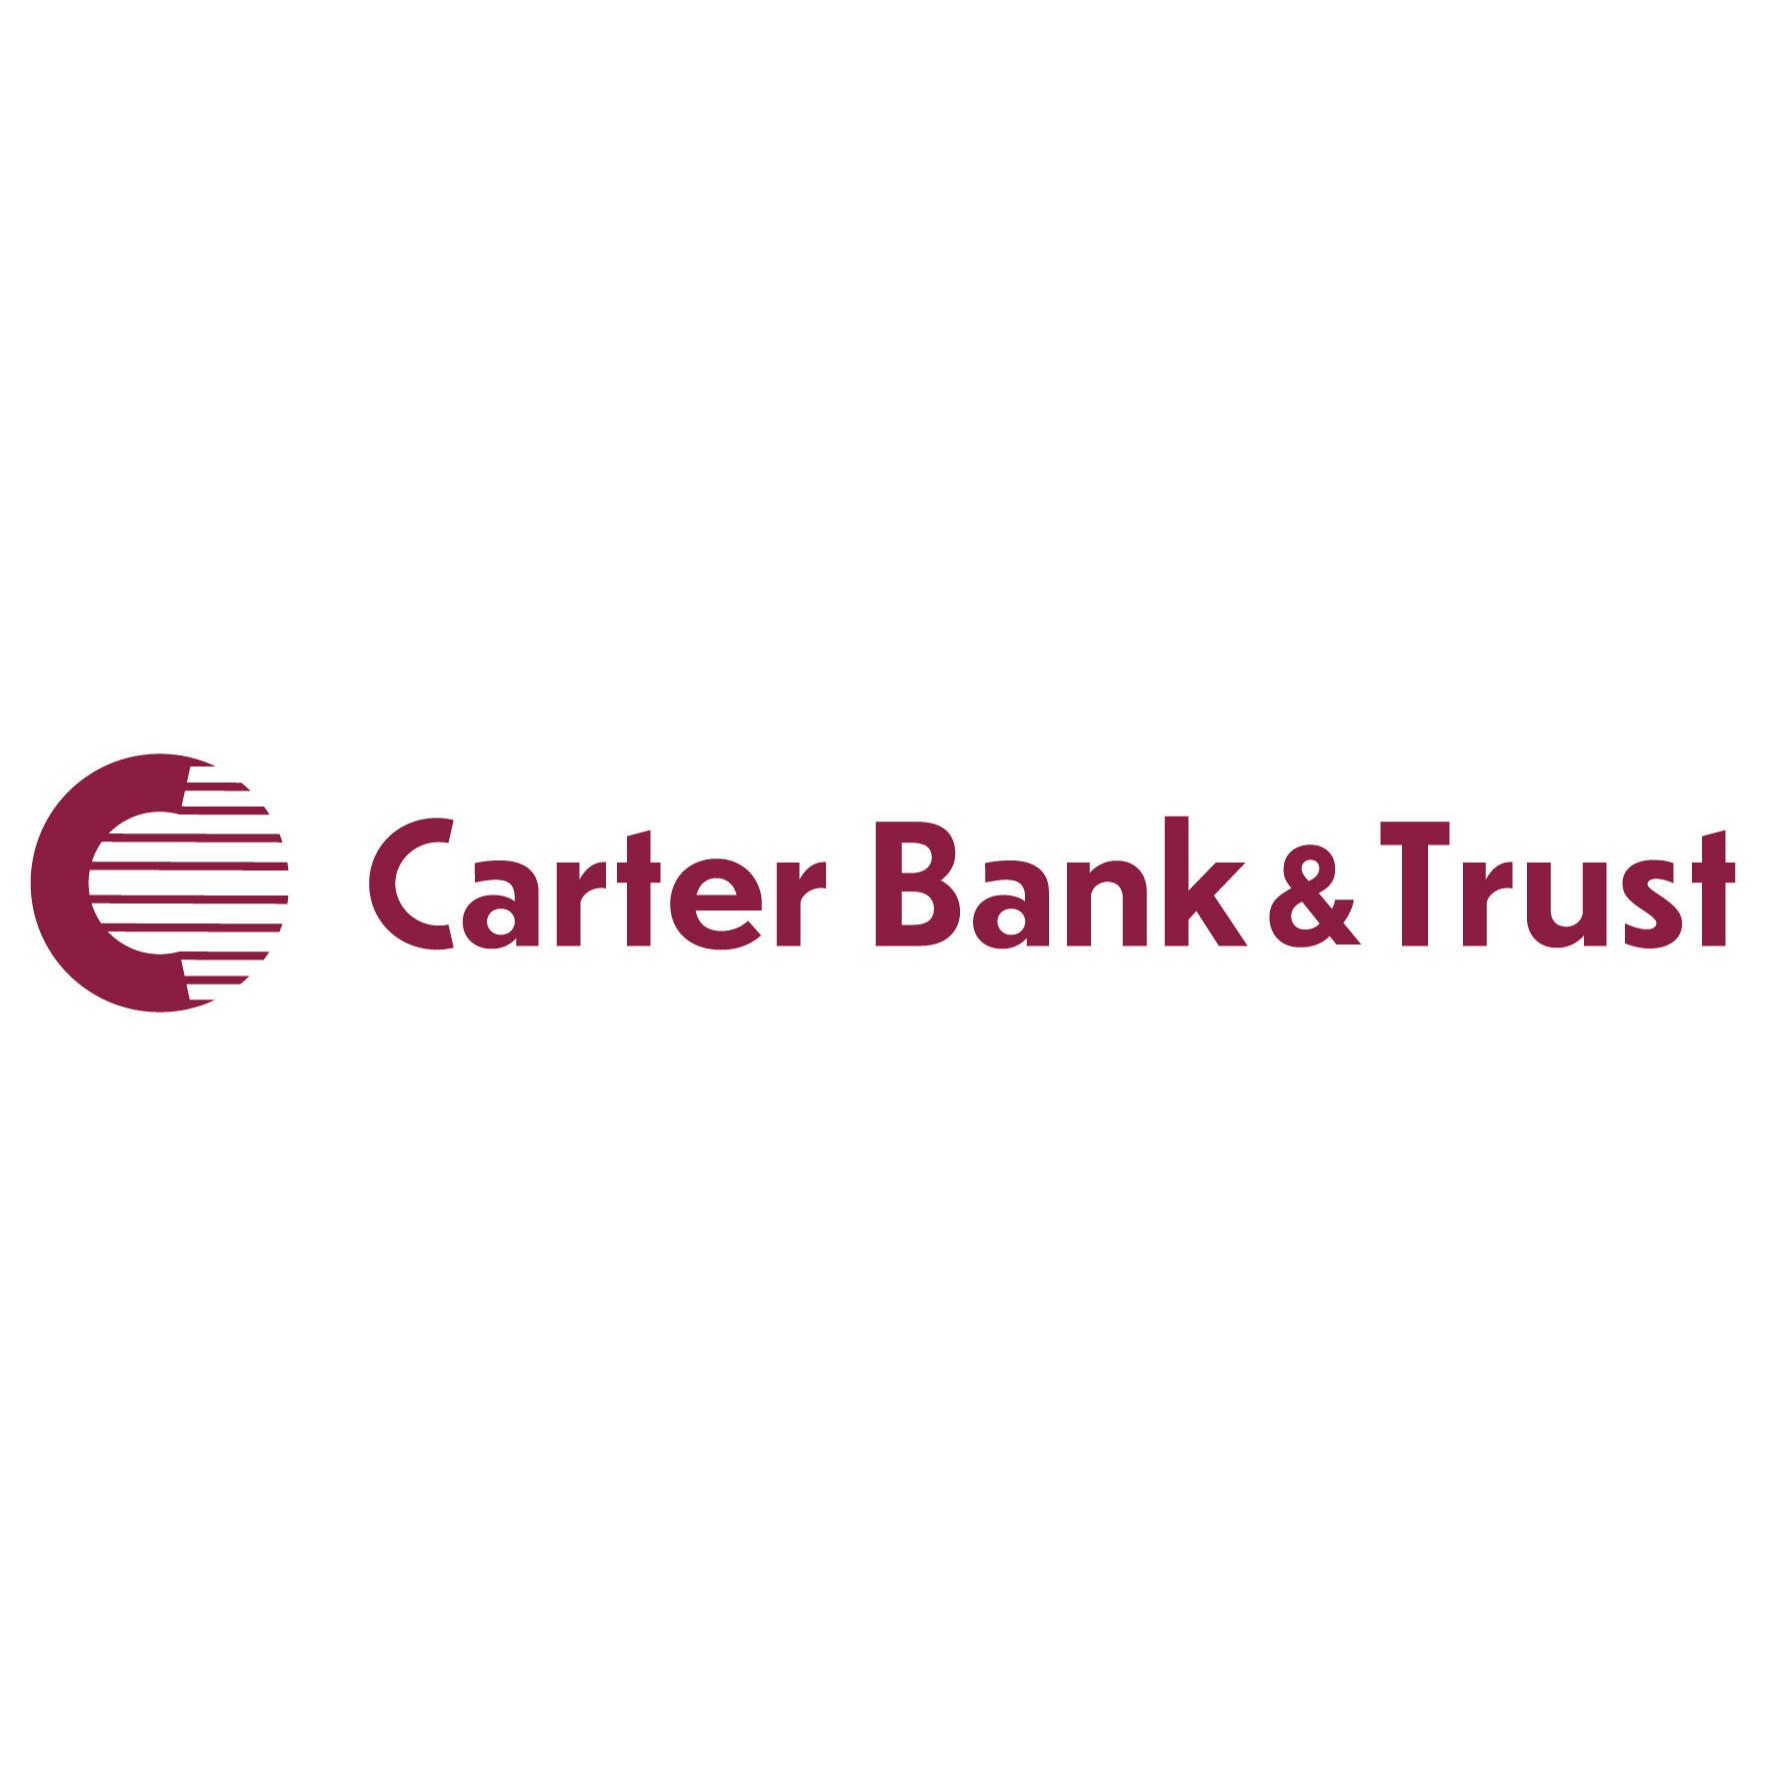 Carter Bank & Trust - Commercial and Administrative Office